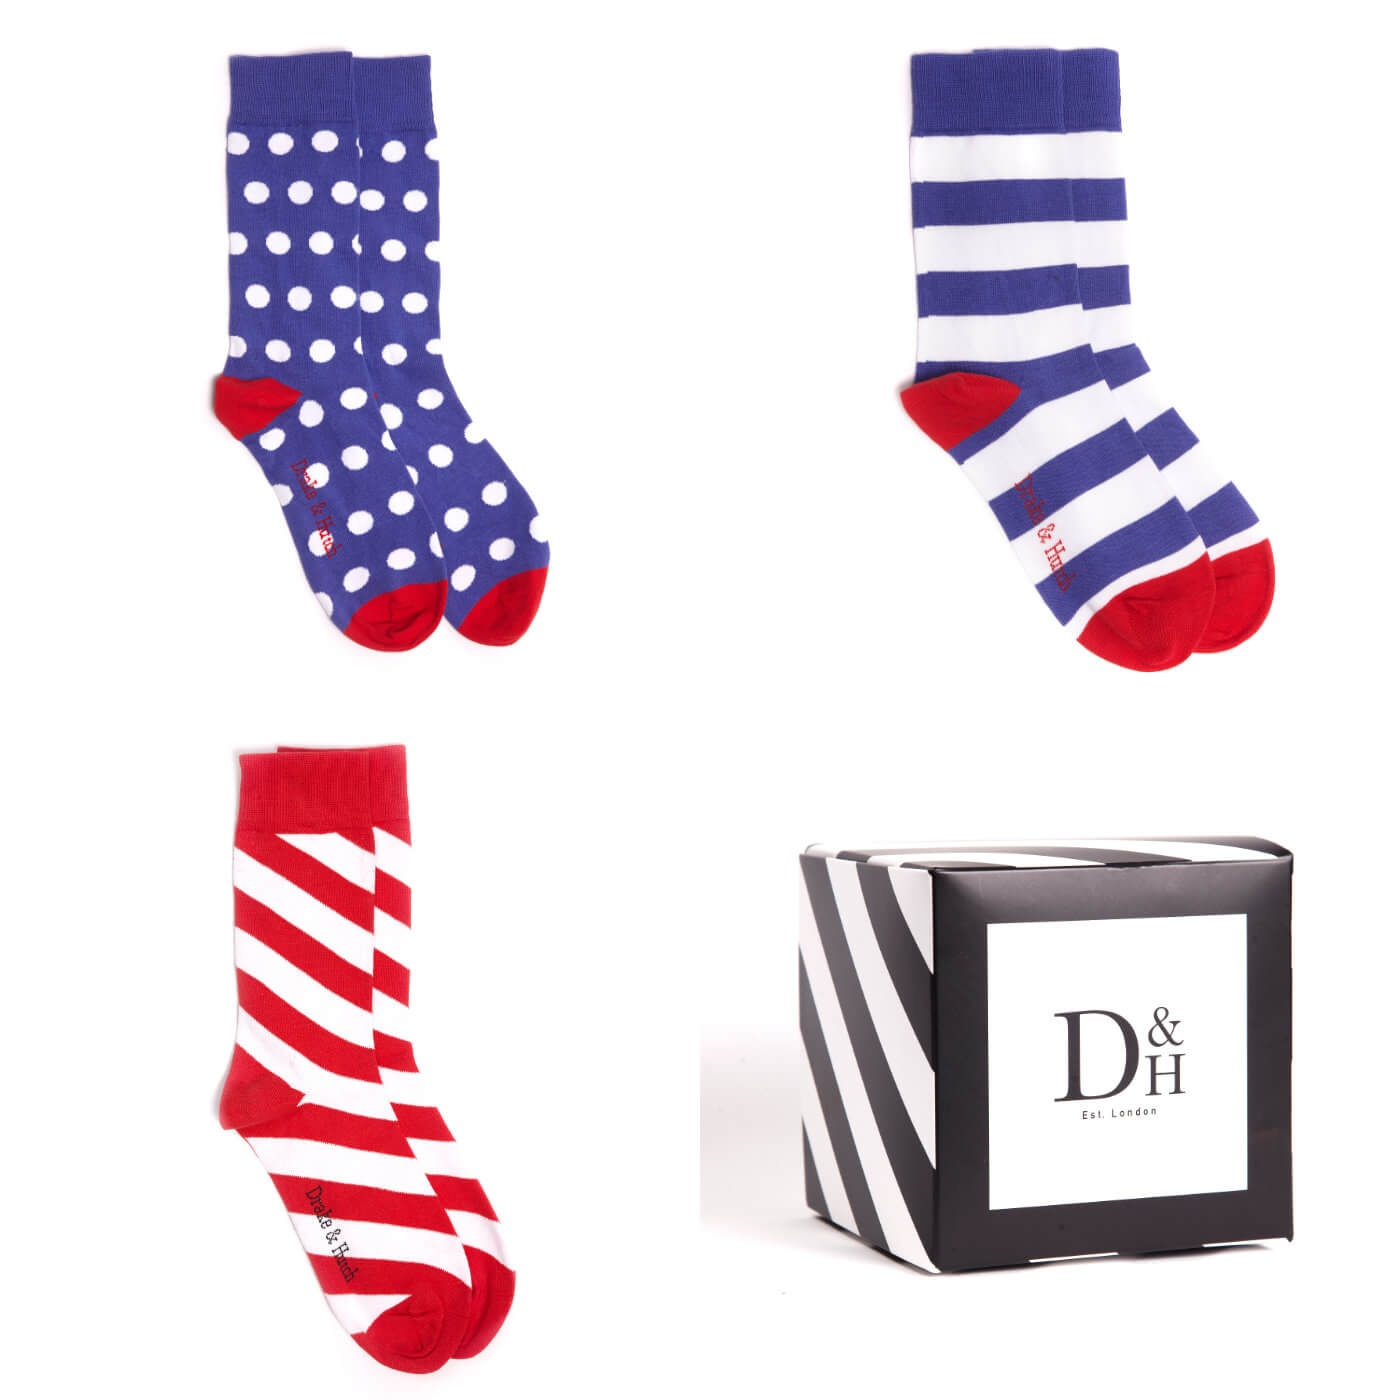 Classic Print Sock Selection - 3 Pack of Socks with Gift Box